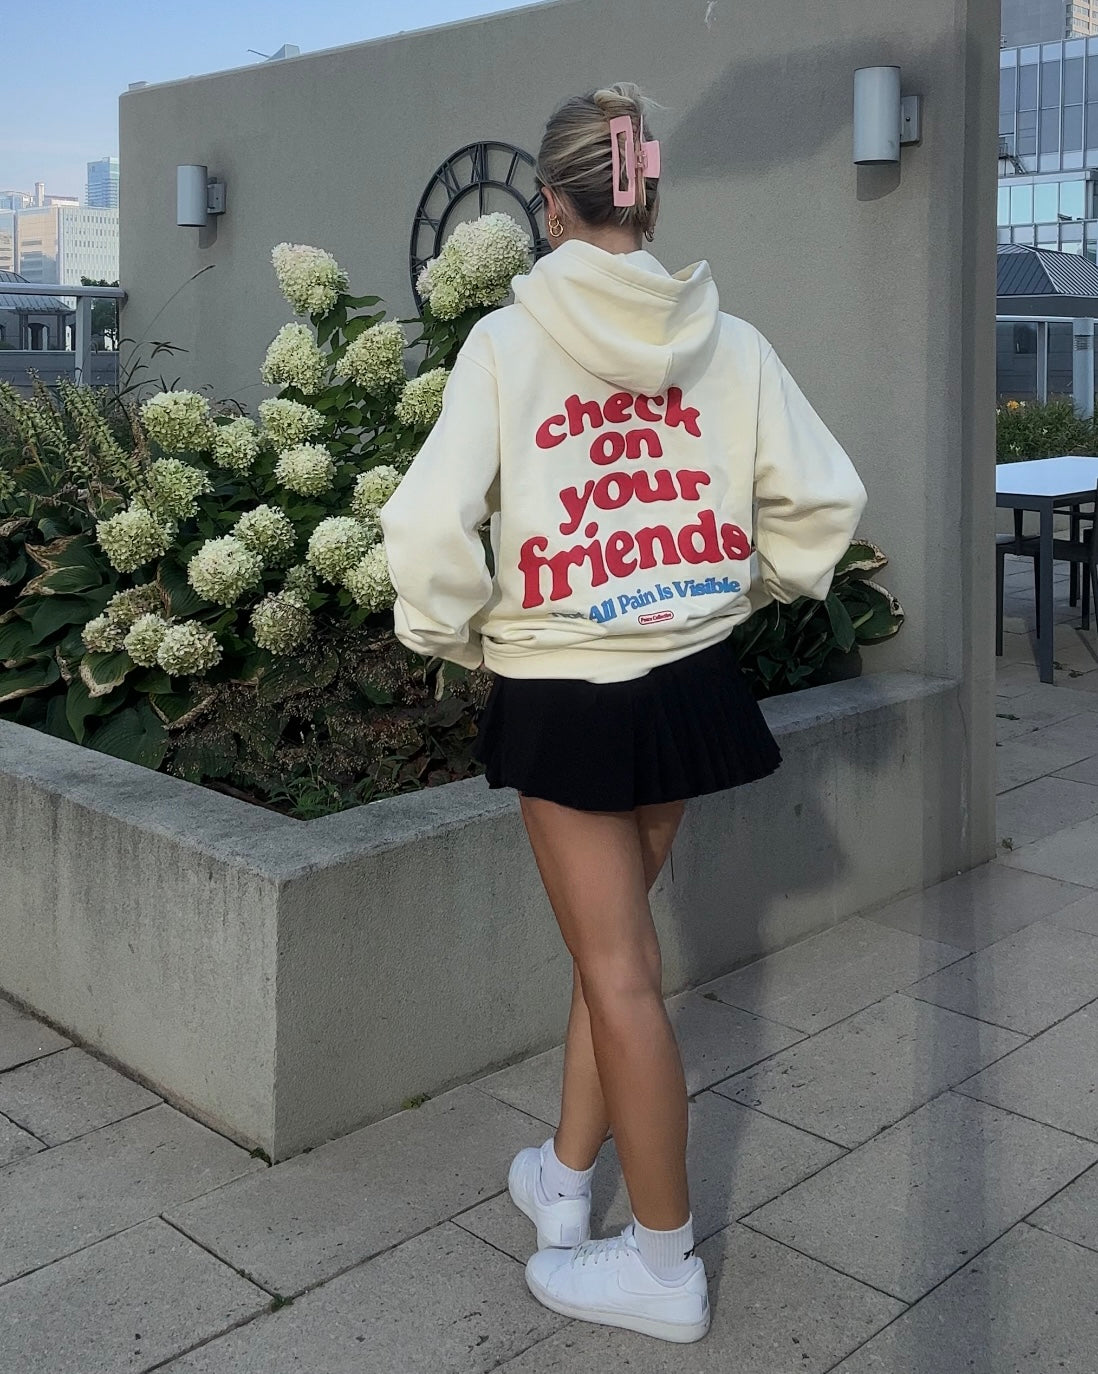 Check on your friends Hoodie - Ivory